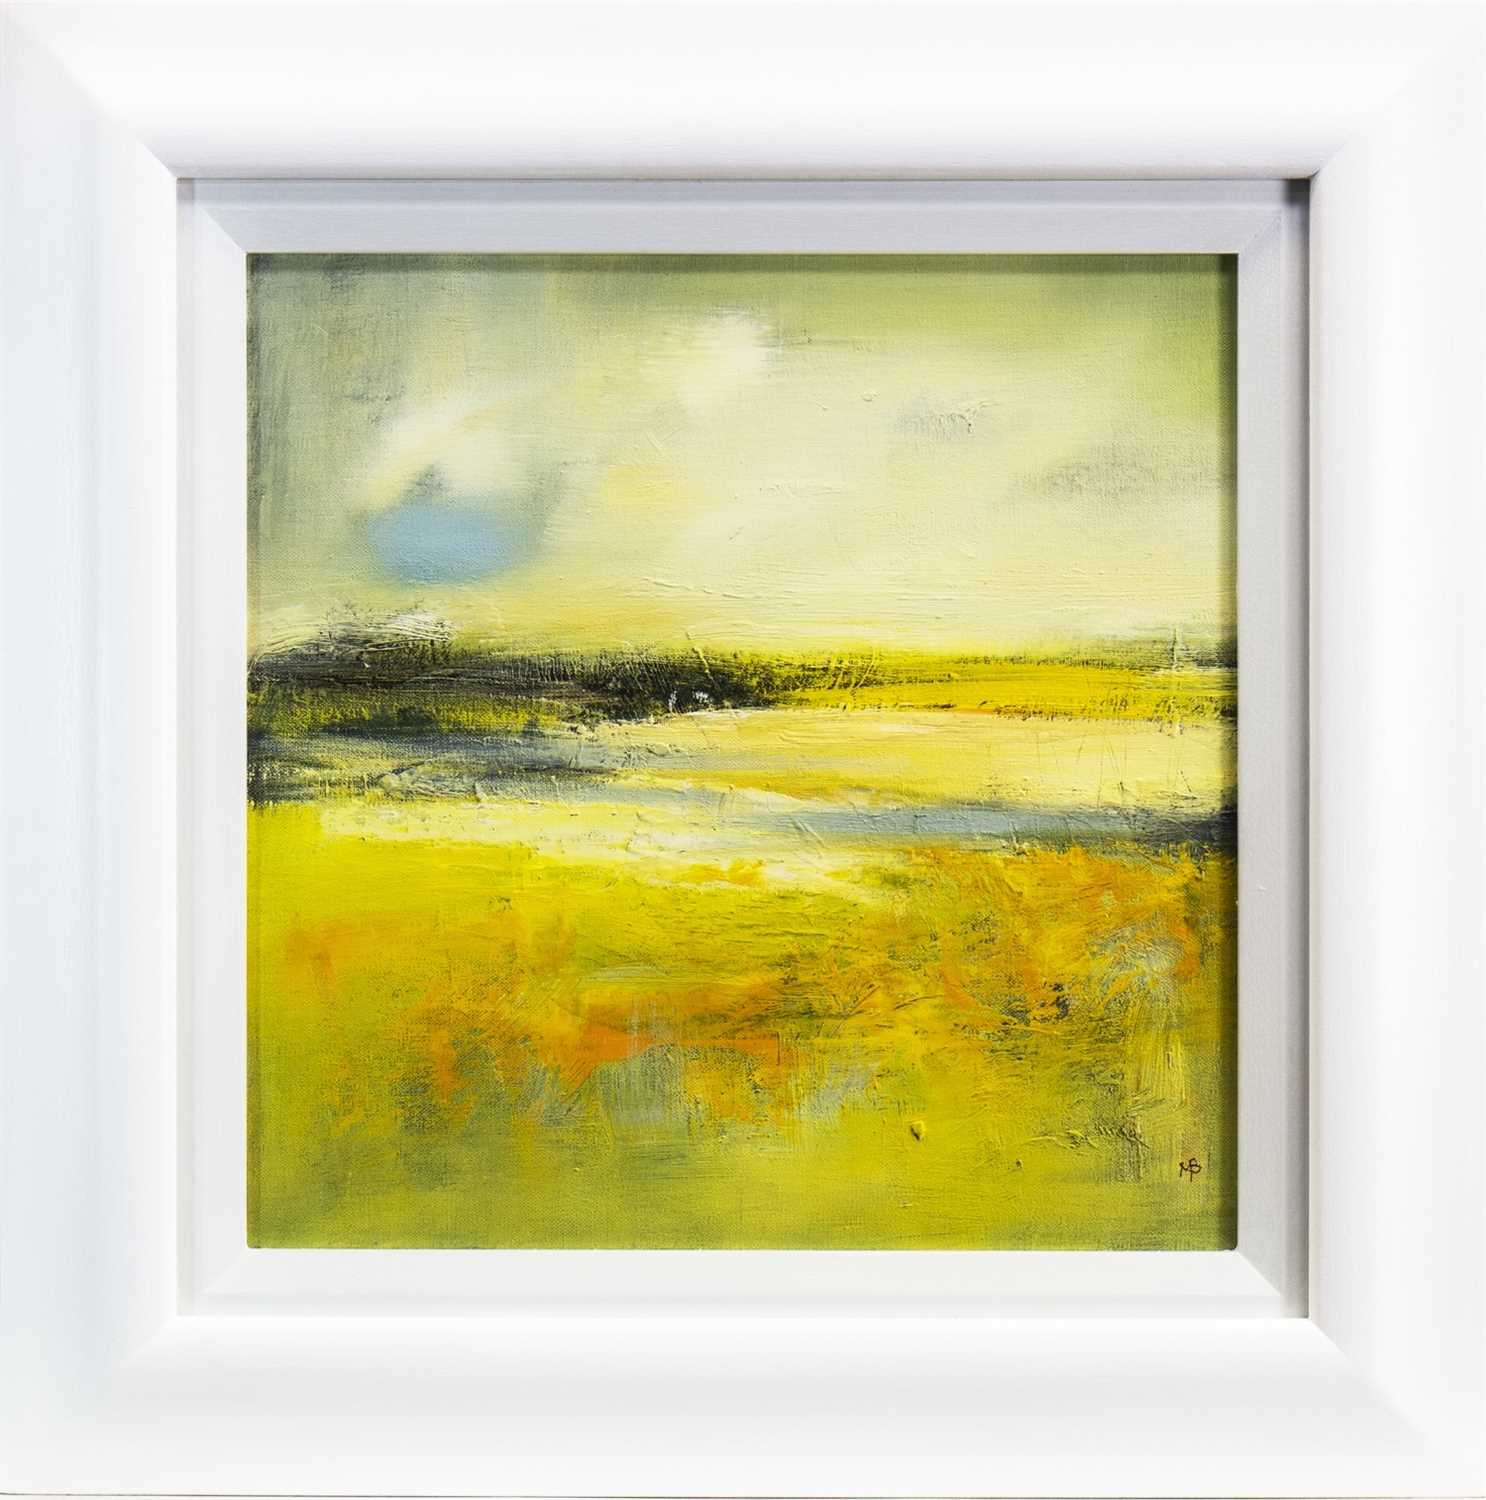 Lot 525 - CORN MARIGOLDS, A MIXED MEDIA BY MAY BYRNE